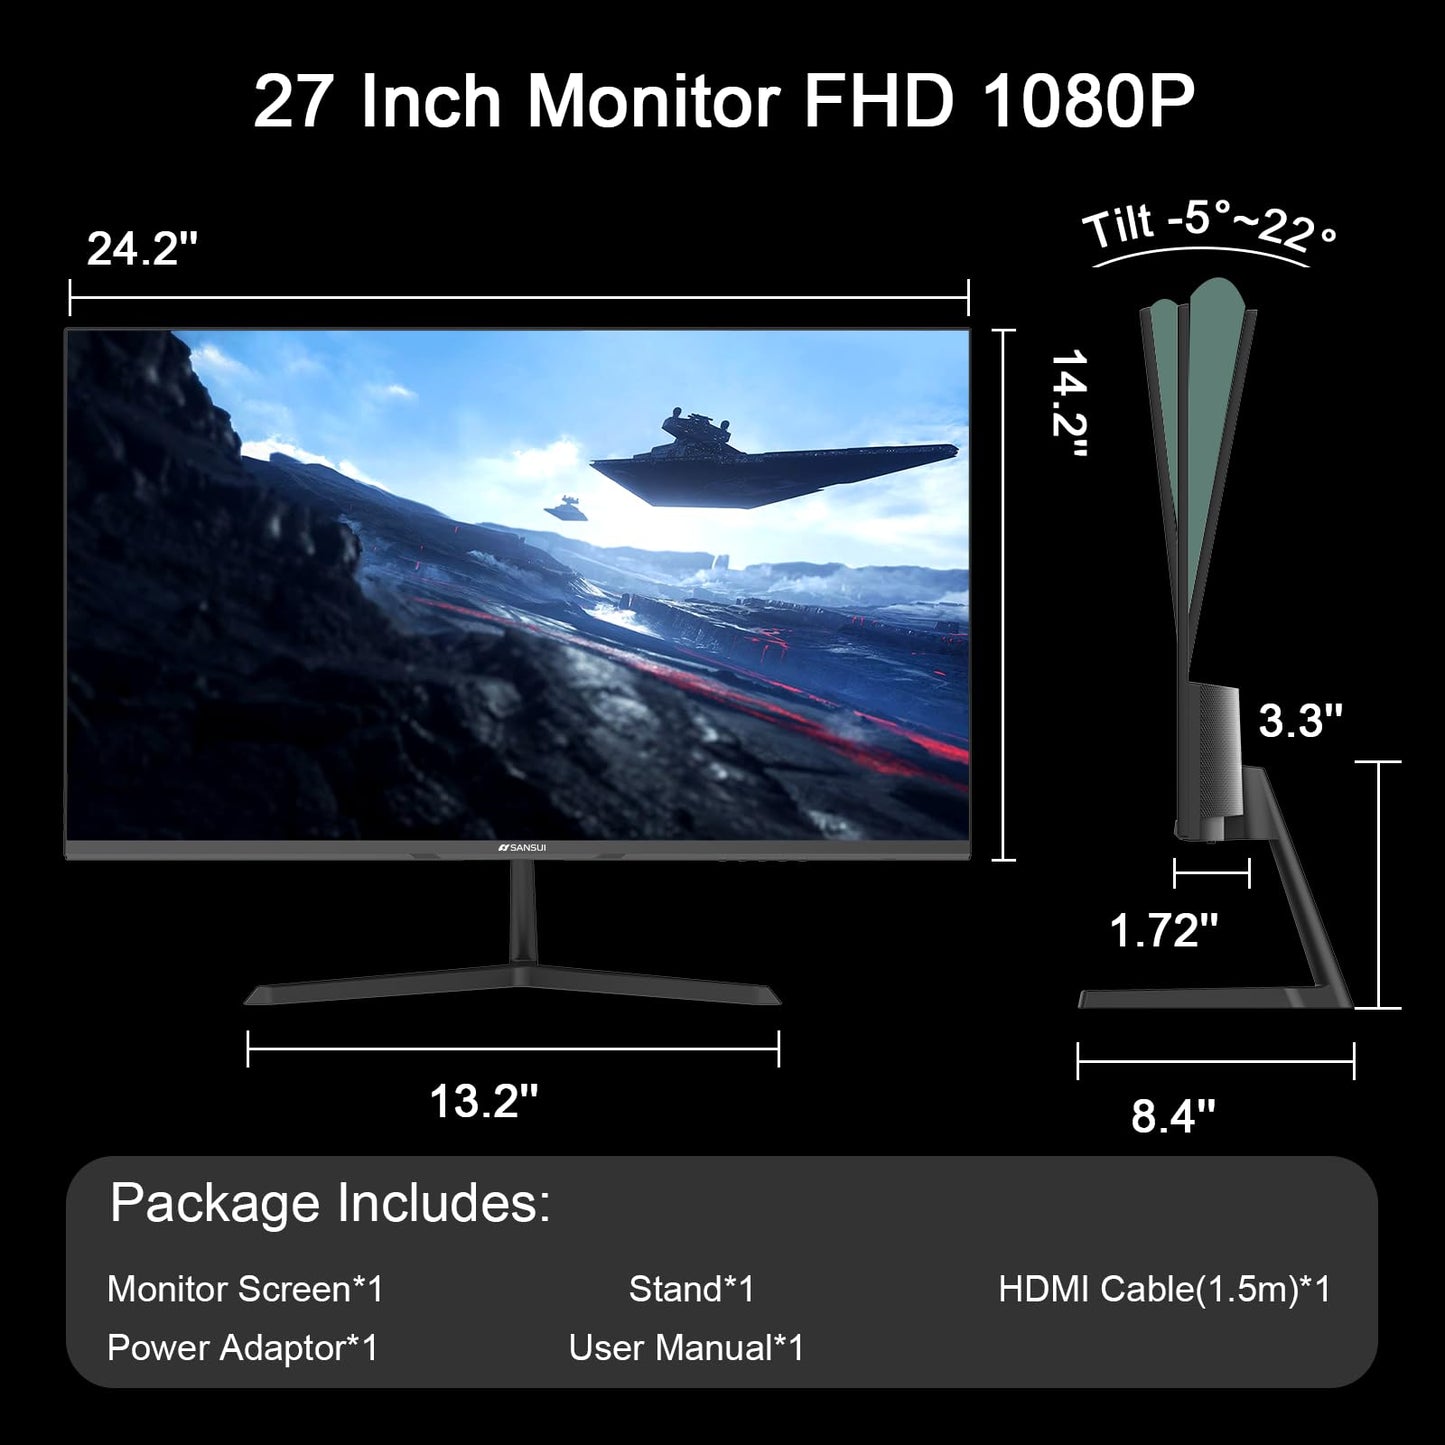 SANSUI 27 Inch Monitor, IPS 100Hz Computer Monitor Full HD 1920 x 1080P with HDMI VGA Interface Eye Care Frameless 100 x 100mm VESA (ES-27X3AL, HDMI Cable Included)